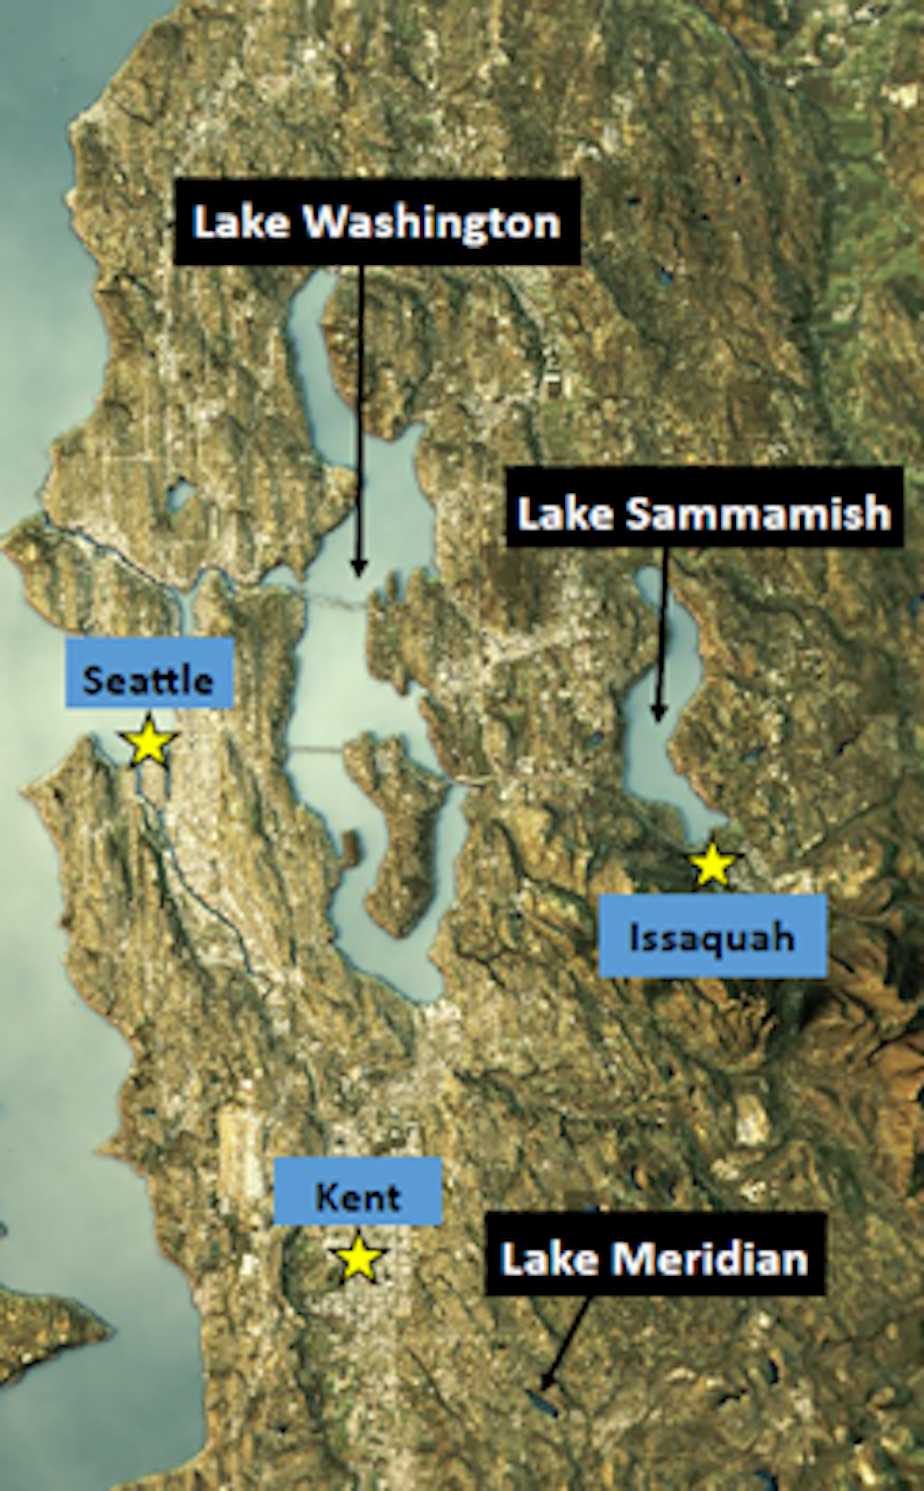 caption: According to a 2022 report, the Washington State Department of Health found dangerous chemicals in cutthroat trout from Lake Washington, largemouth bass from Lake Sammamish, and smallmouth bass in Lake Meridan, all in King County. 